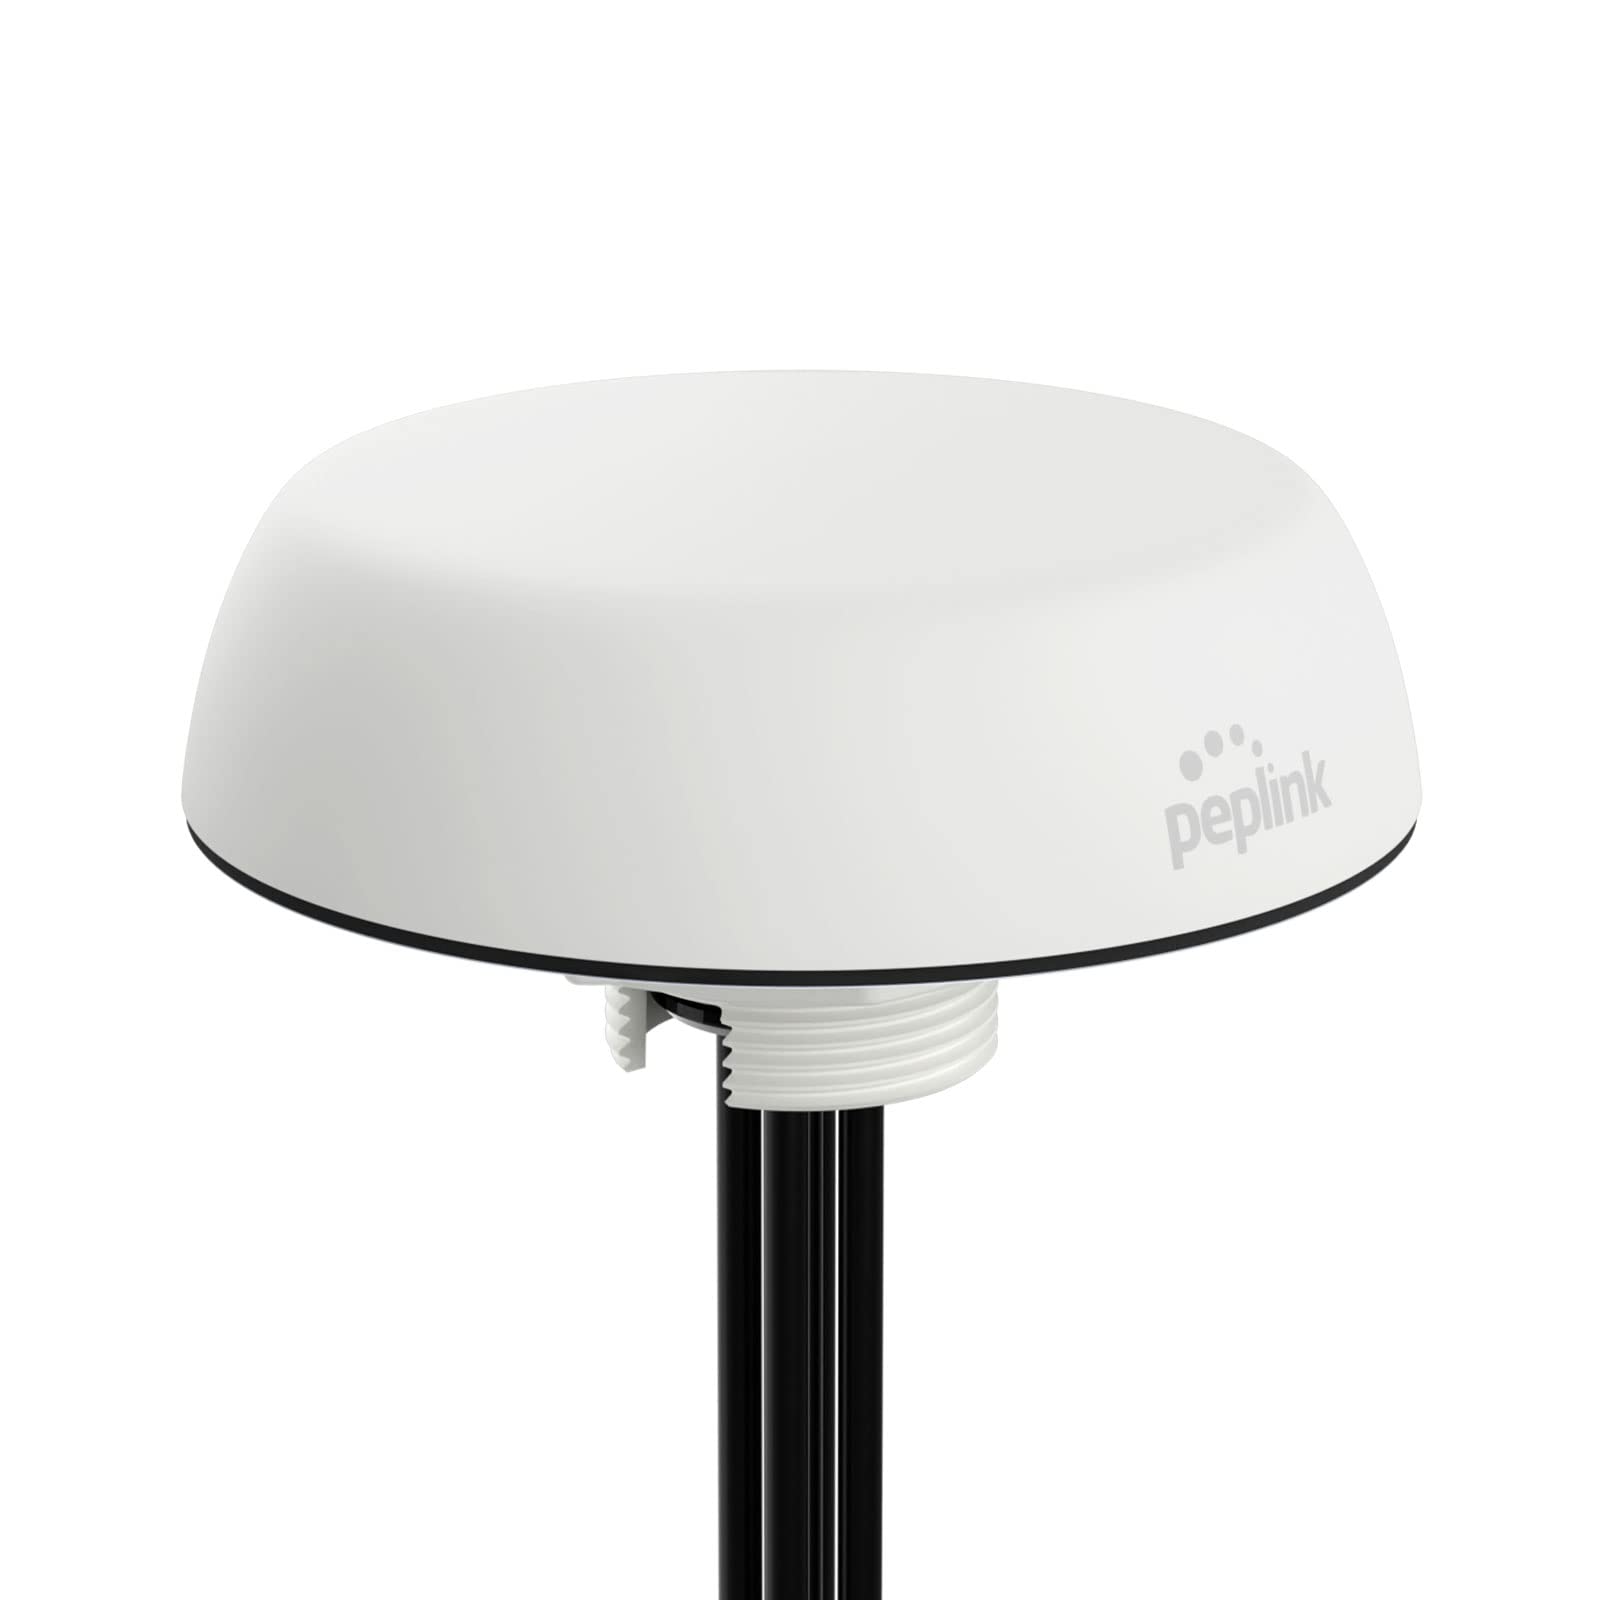 Peplink Mobility 40G, 4x4 Mimo 5G Ready Cellular Antenna with GPS Receiver, SMA, 6.5ft/2m, White | ANT-MB-40G-S-W-6